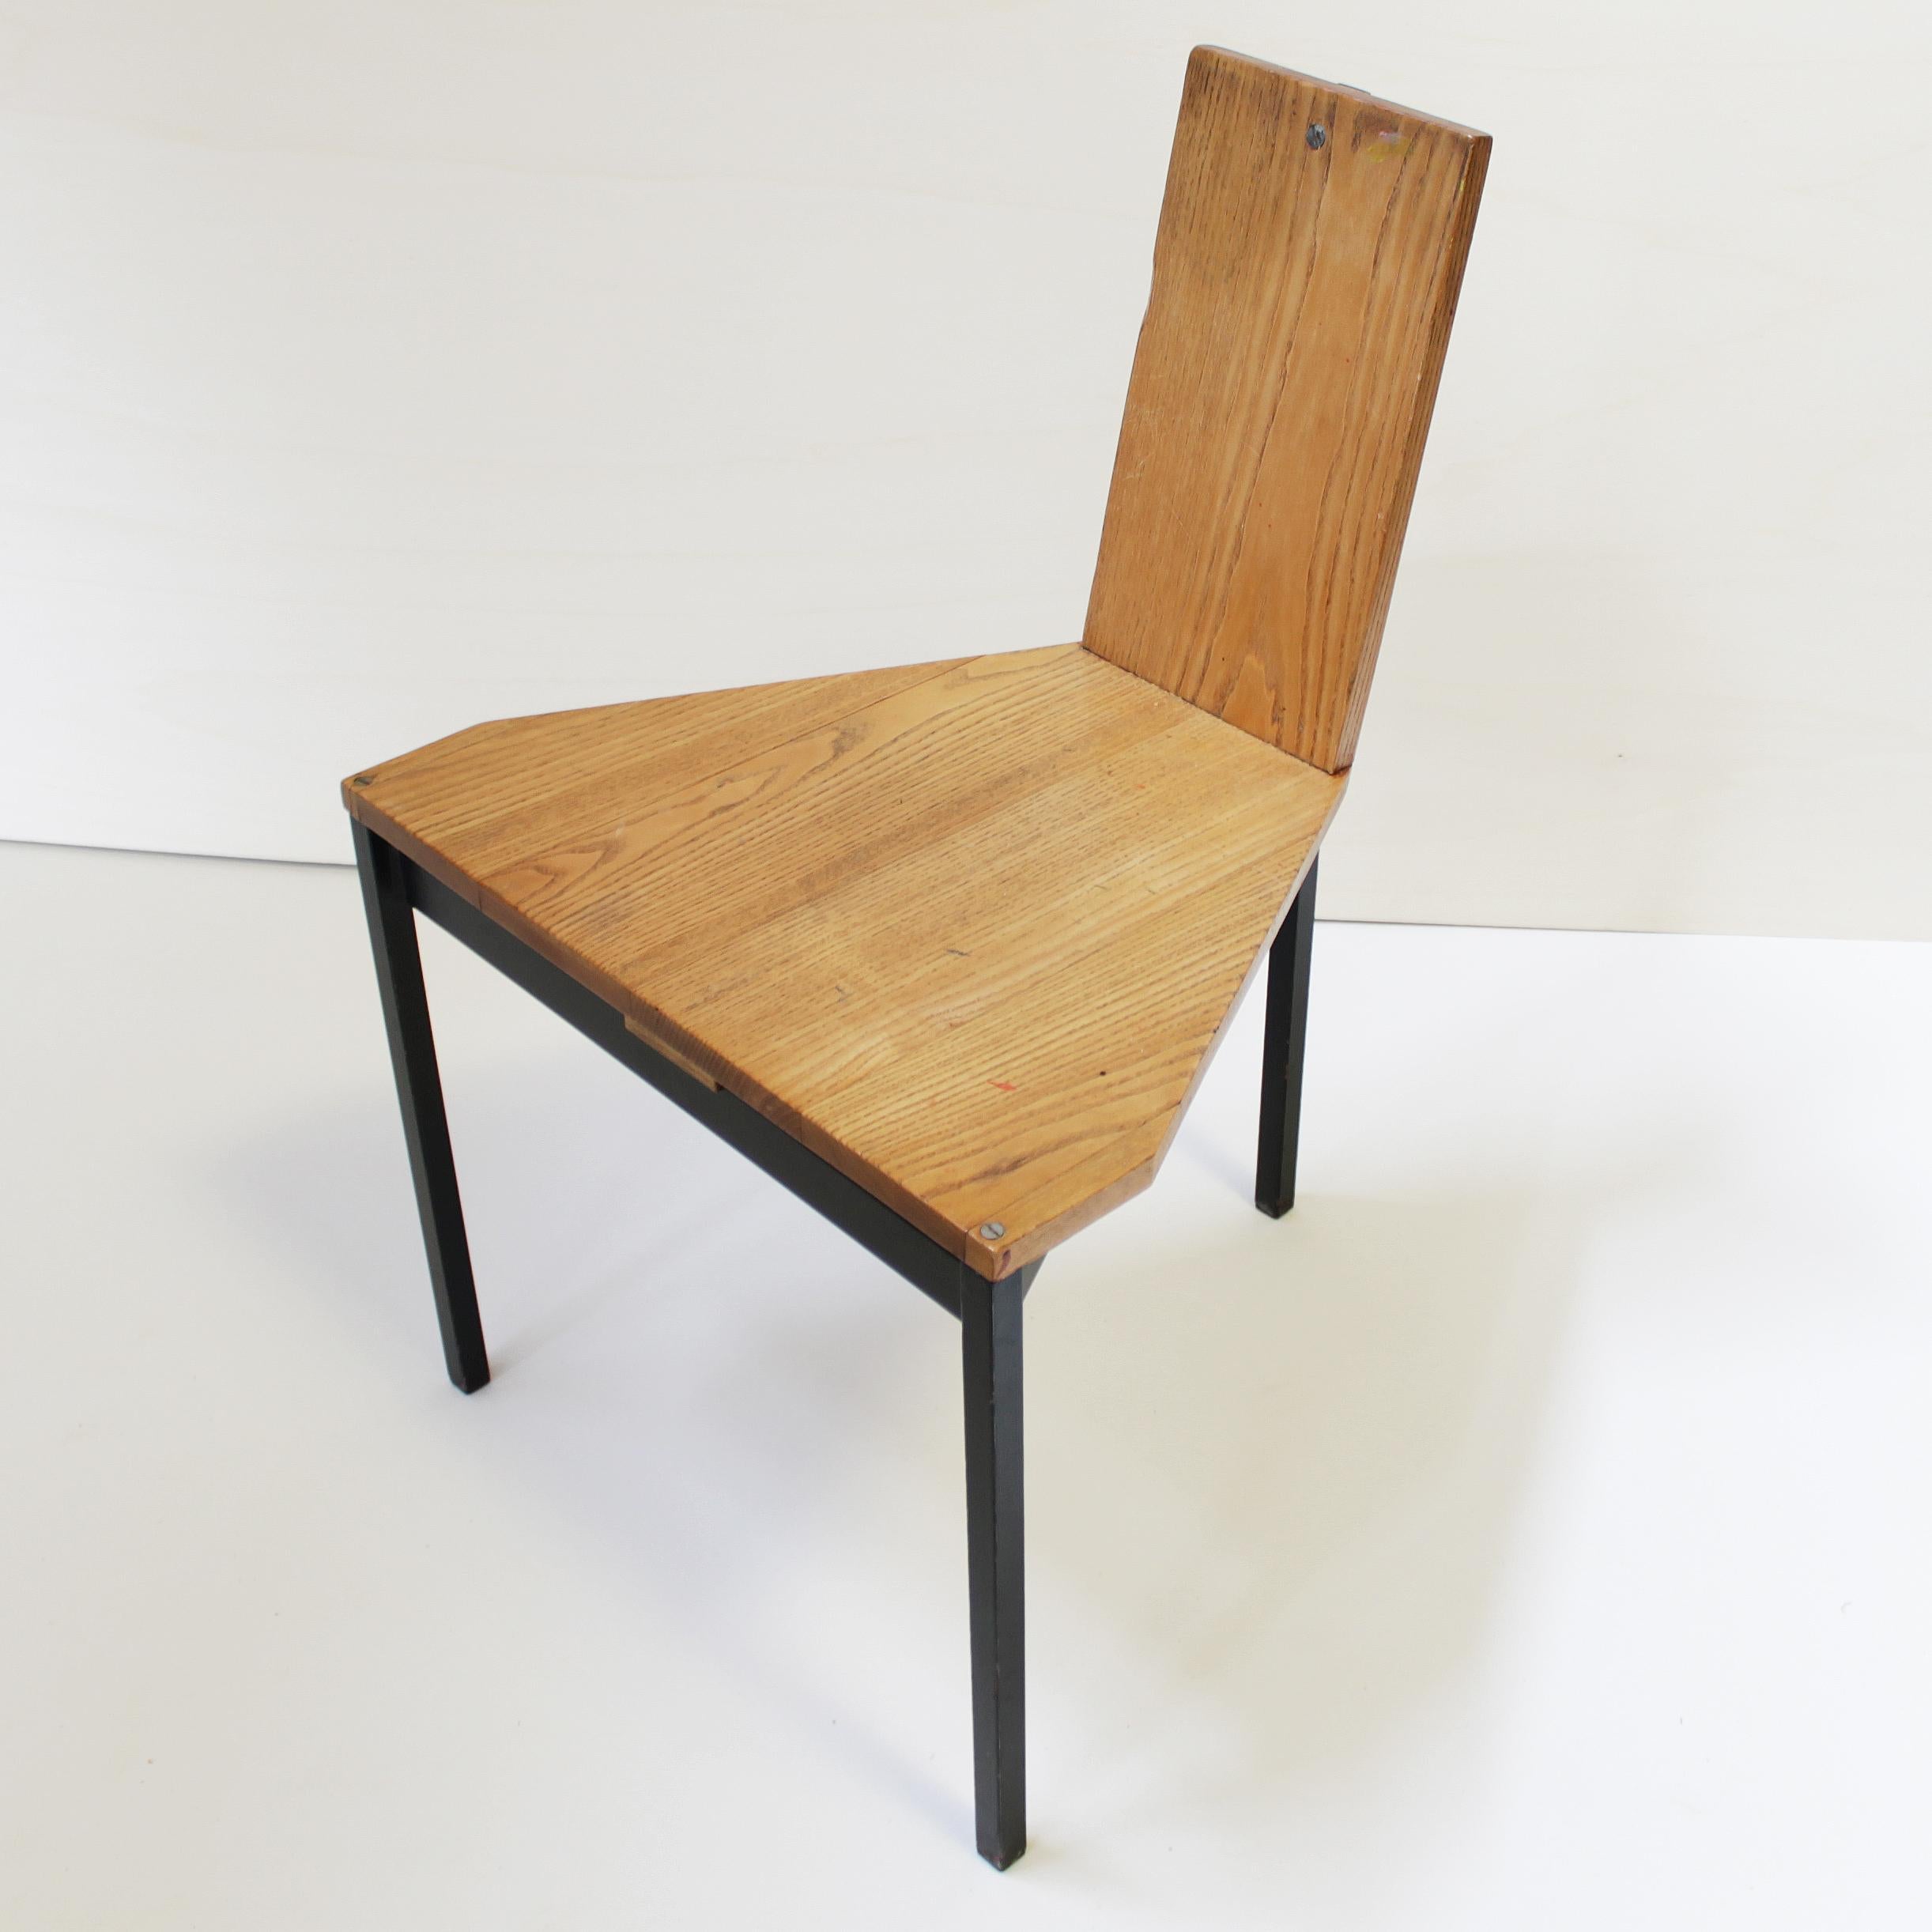 Dining Table and Six '6' Chairs by Wim Den Boon, Netherlands 1958 For Sale 3